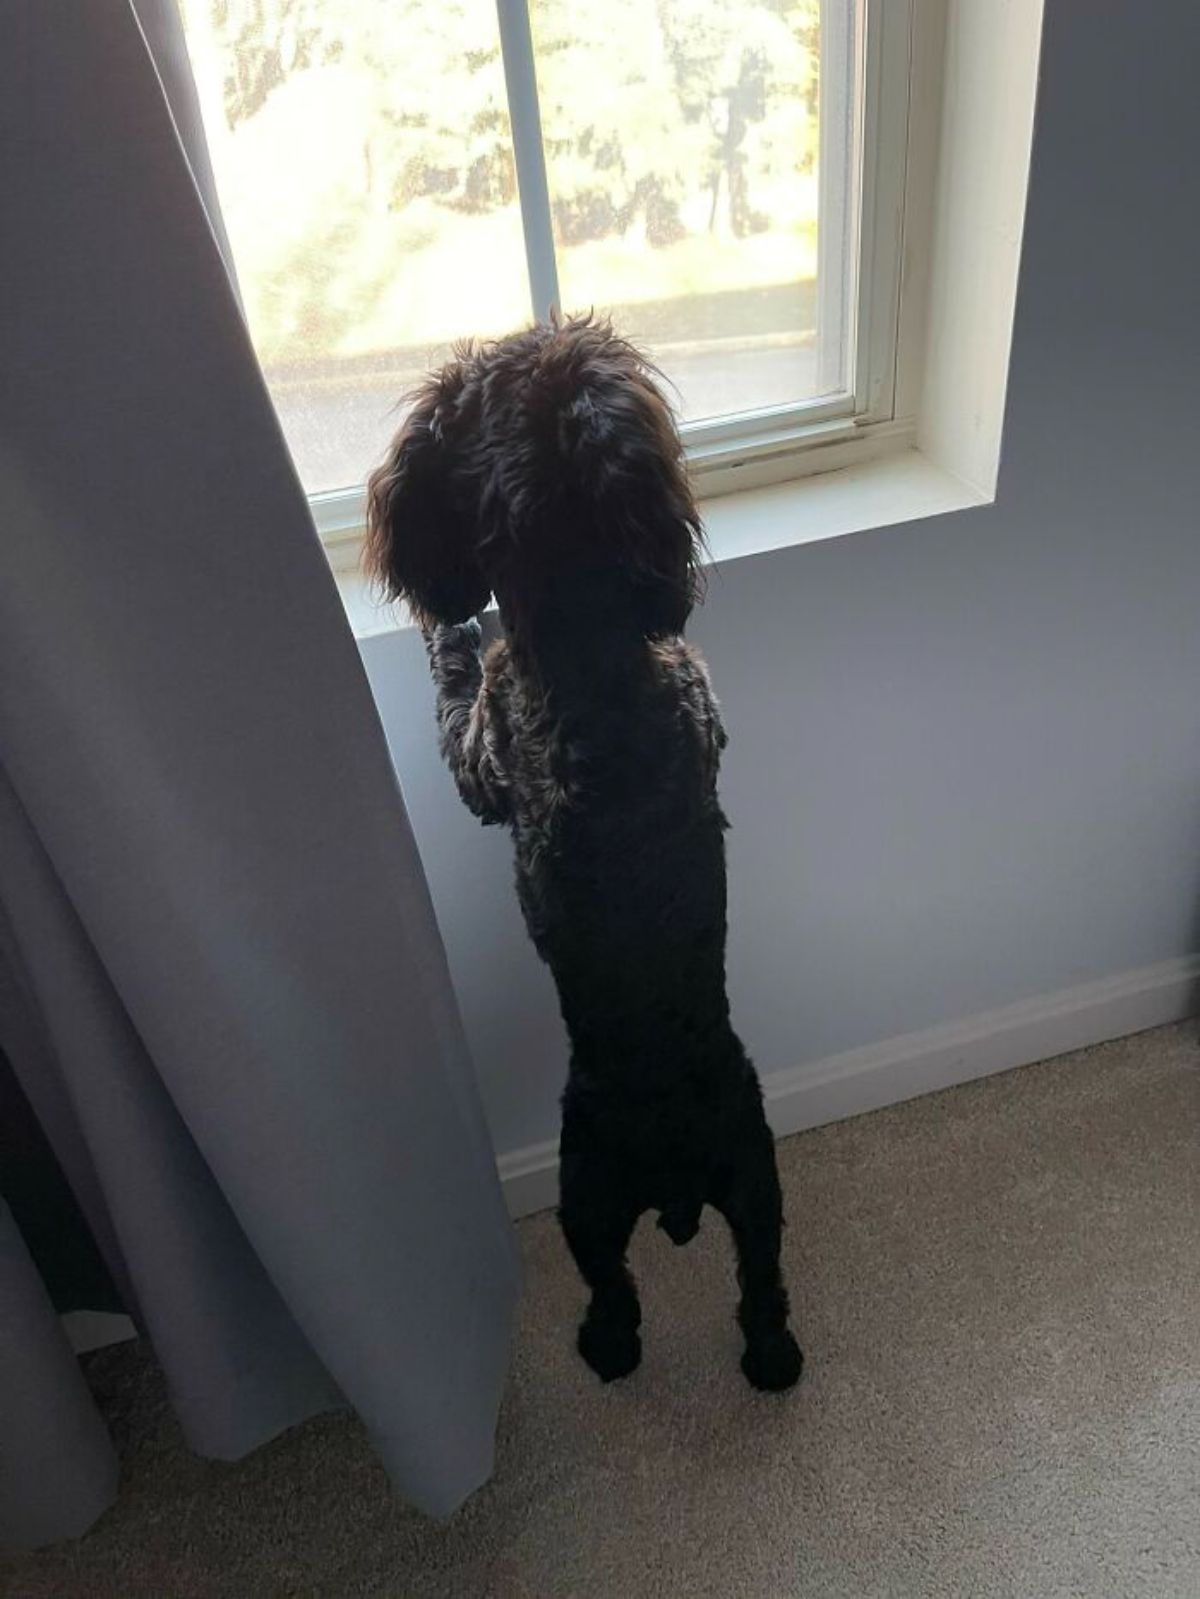 fluffy brown dog standing on hind legs and peeking out of a window